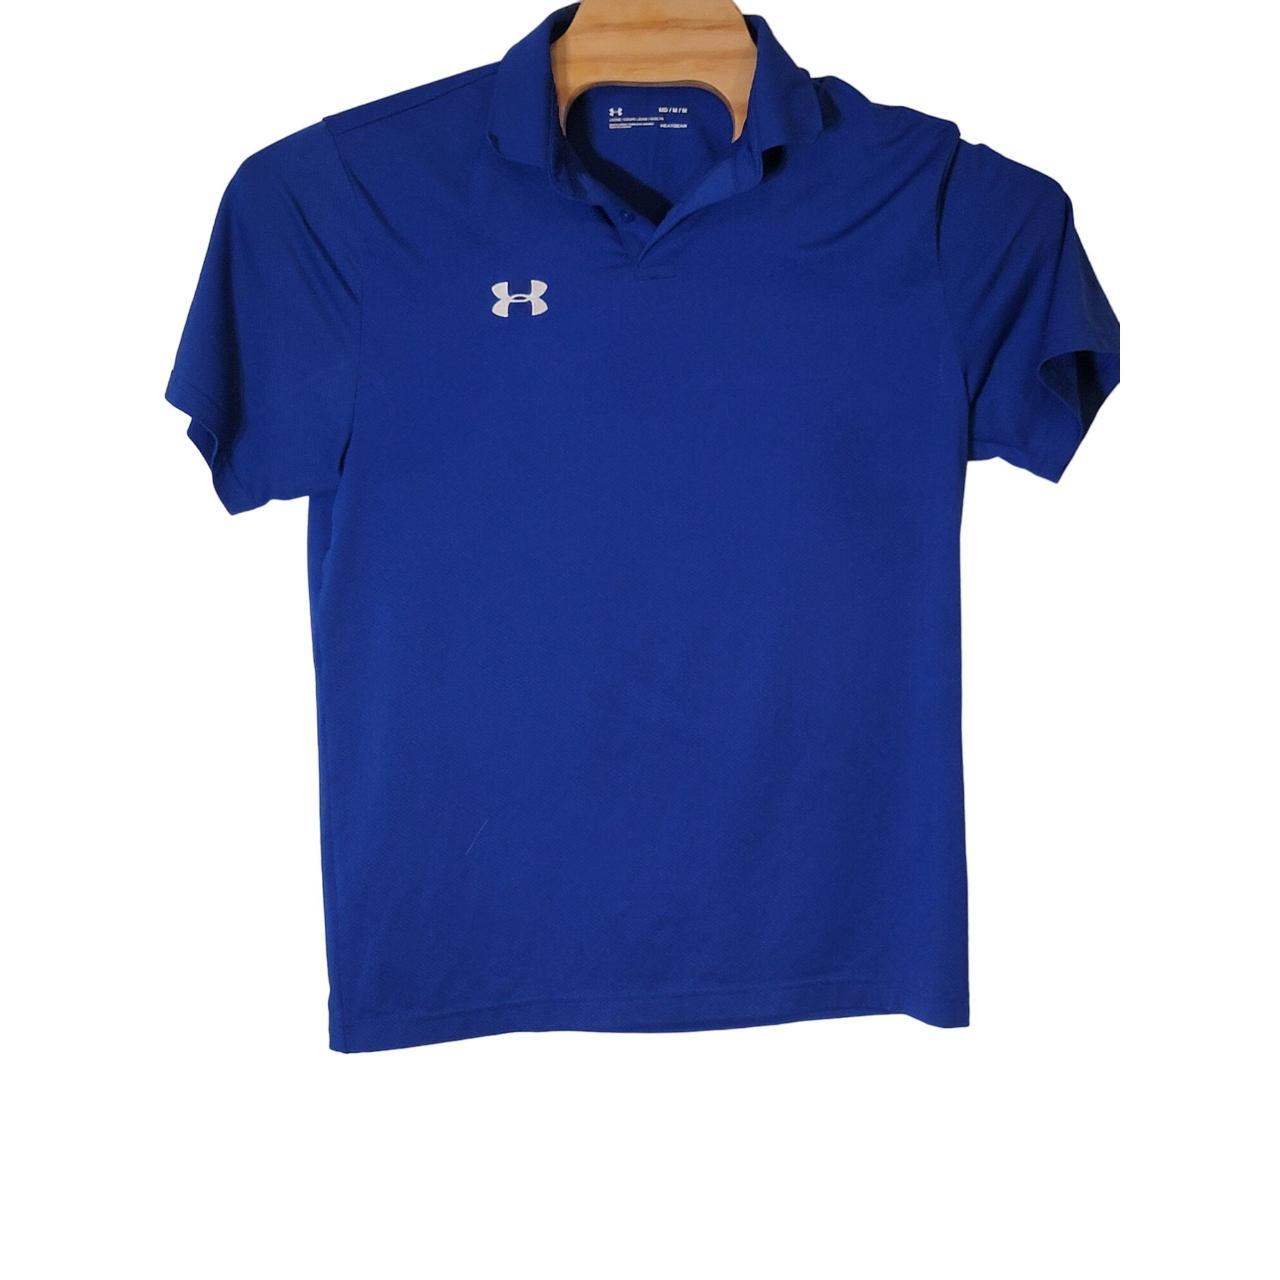 Under Armour's Loose Fit Performance Golf Polo... - Depop